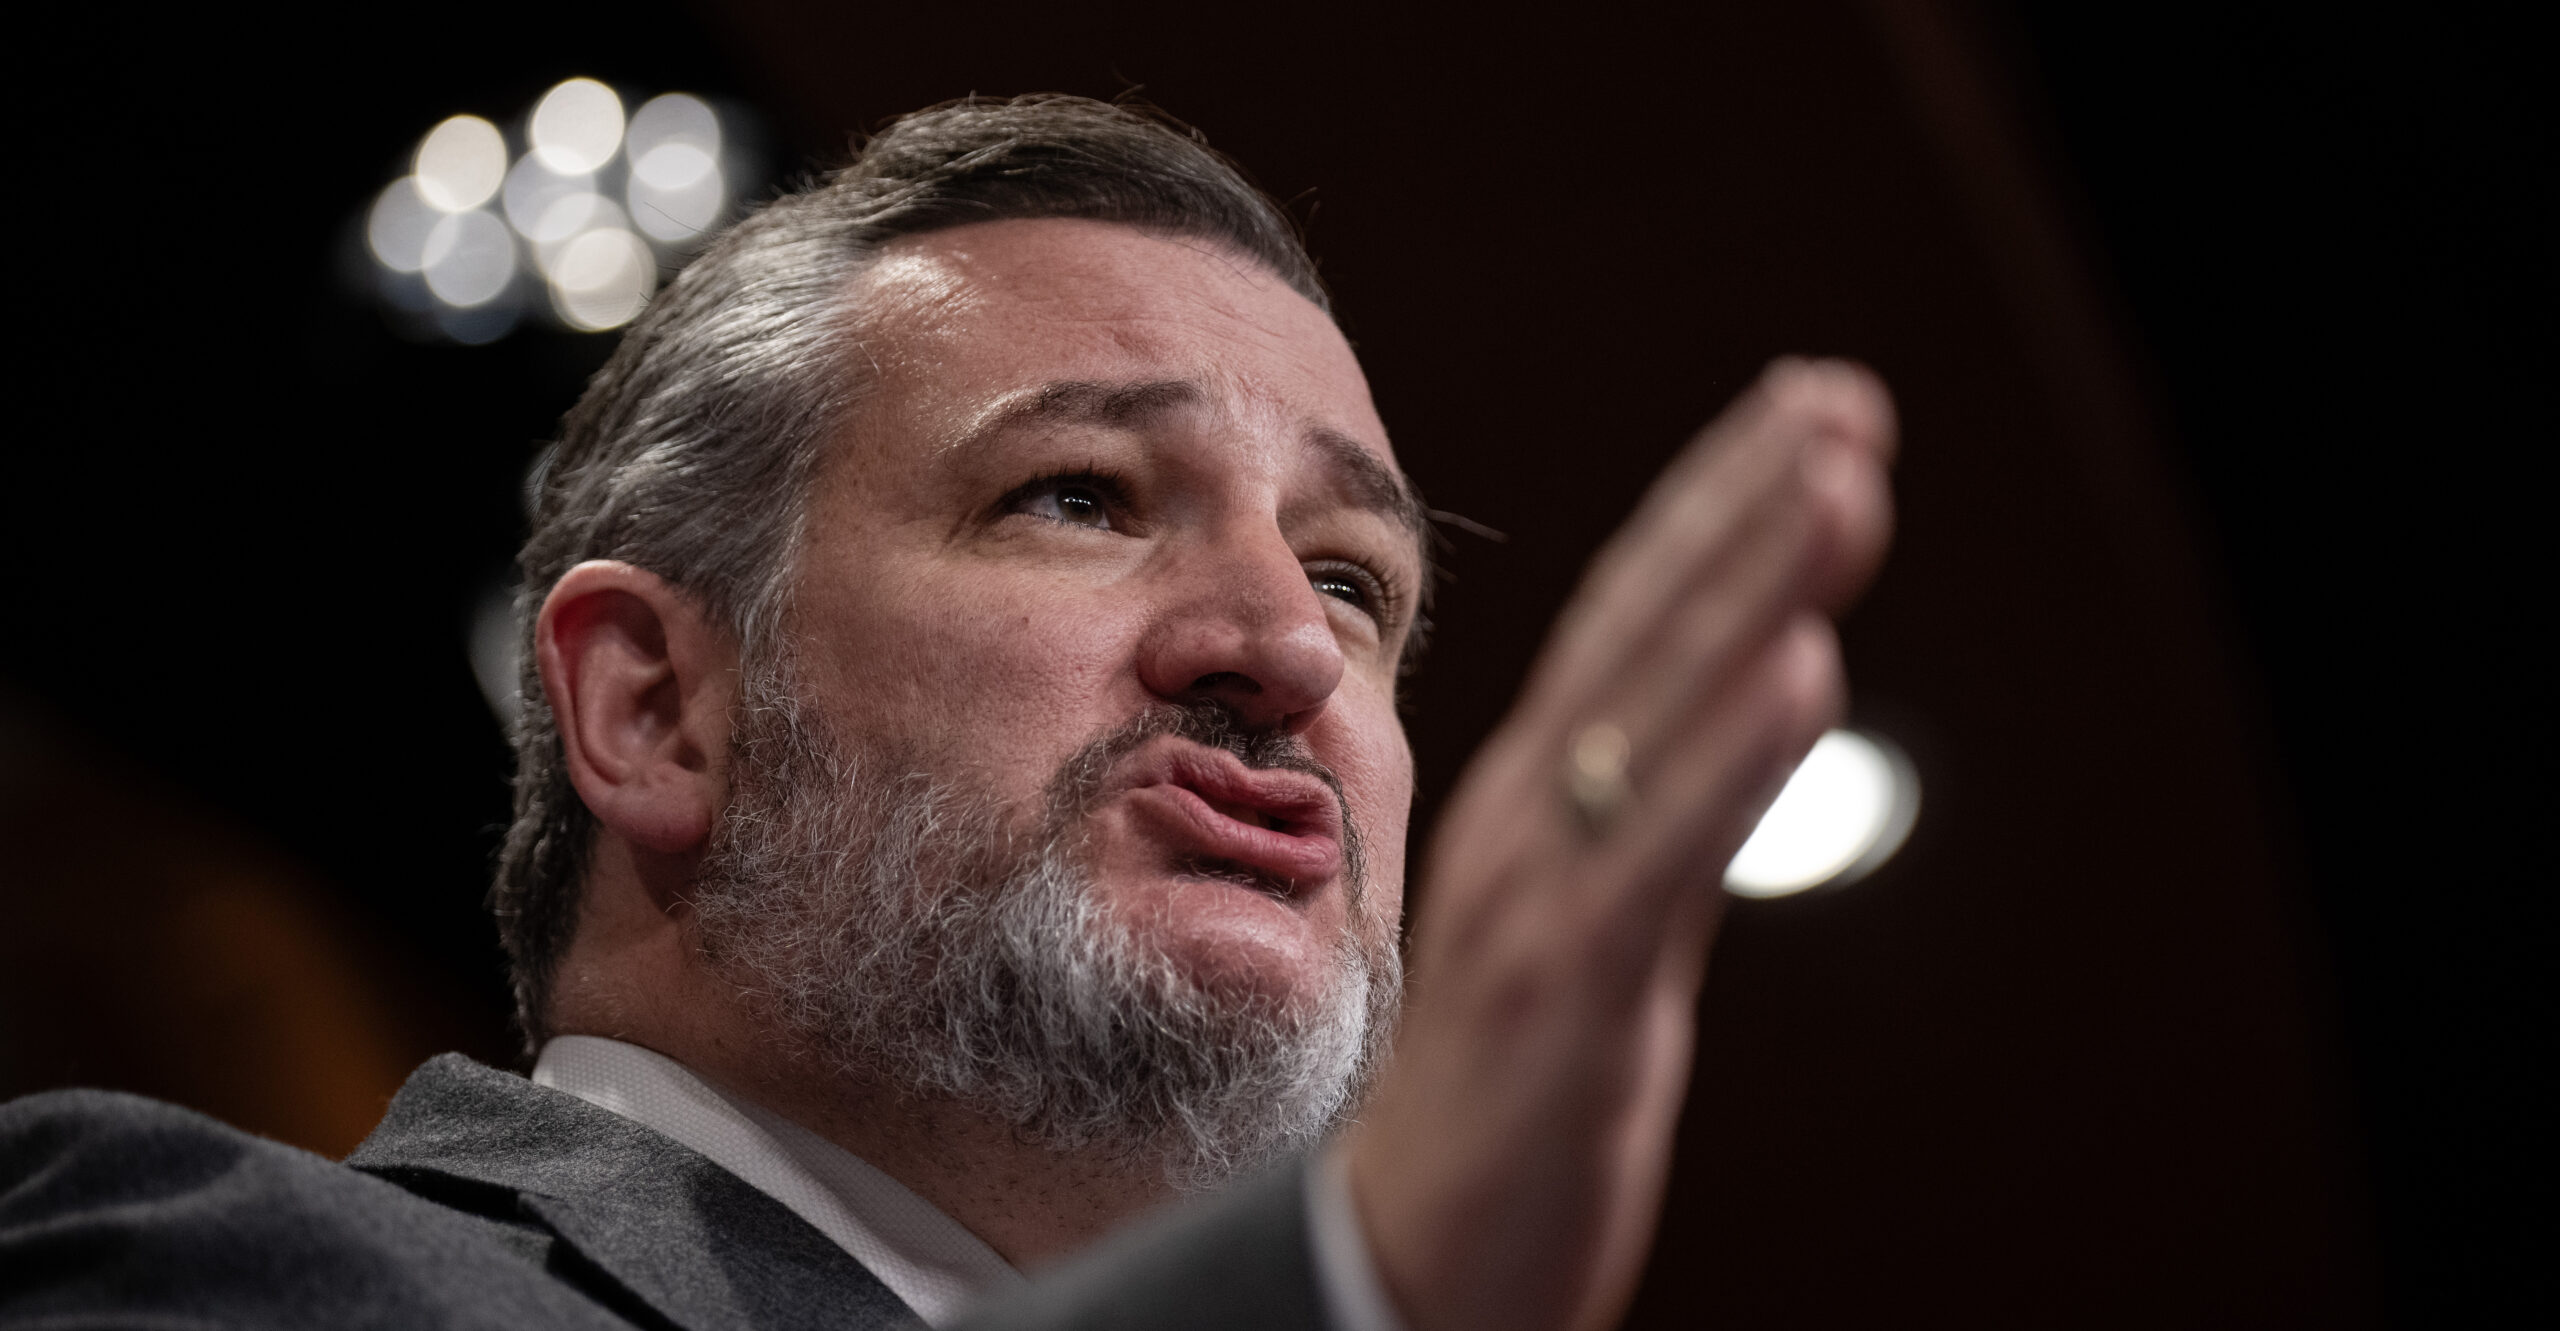 EXCLUSIVE: Cruz Calls for DC Medical Examiner to Investigate Aborted Babies' Remains